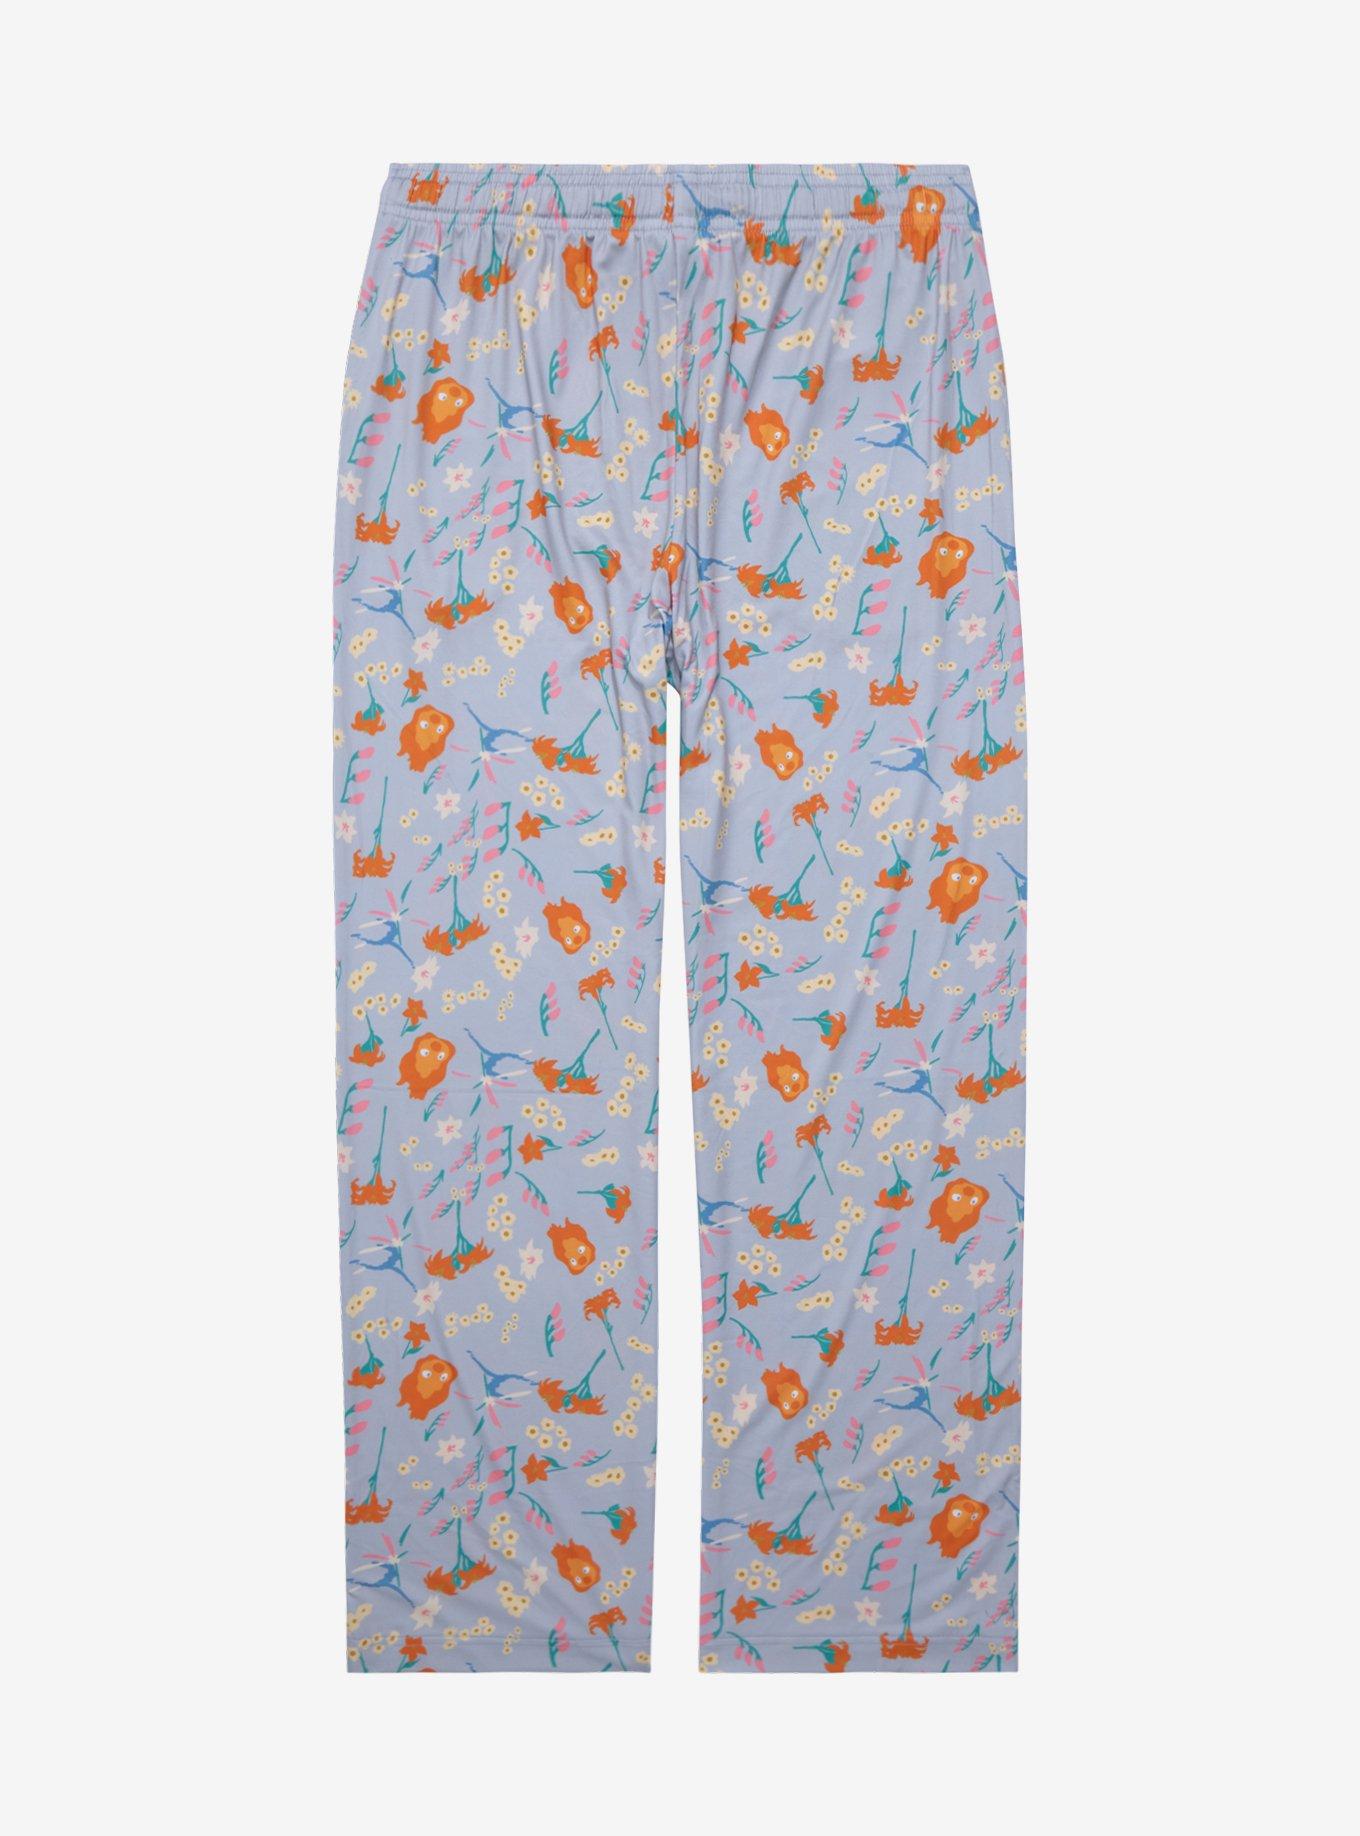 Studio Ghibli Howl’s Moving Castle Calcifer Floral Allover Print Sleep Pants - BoxLunch Exclusive, GREY, alternate